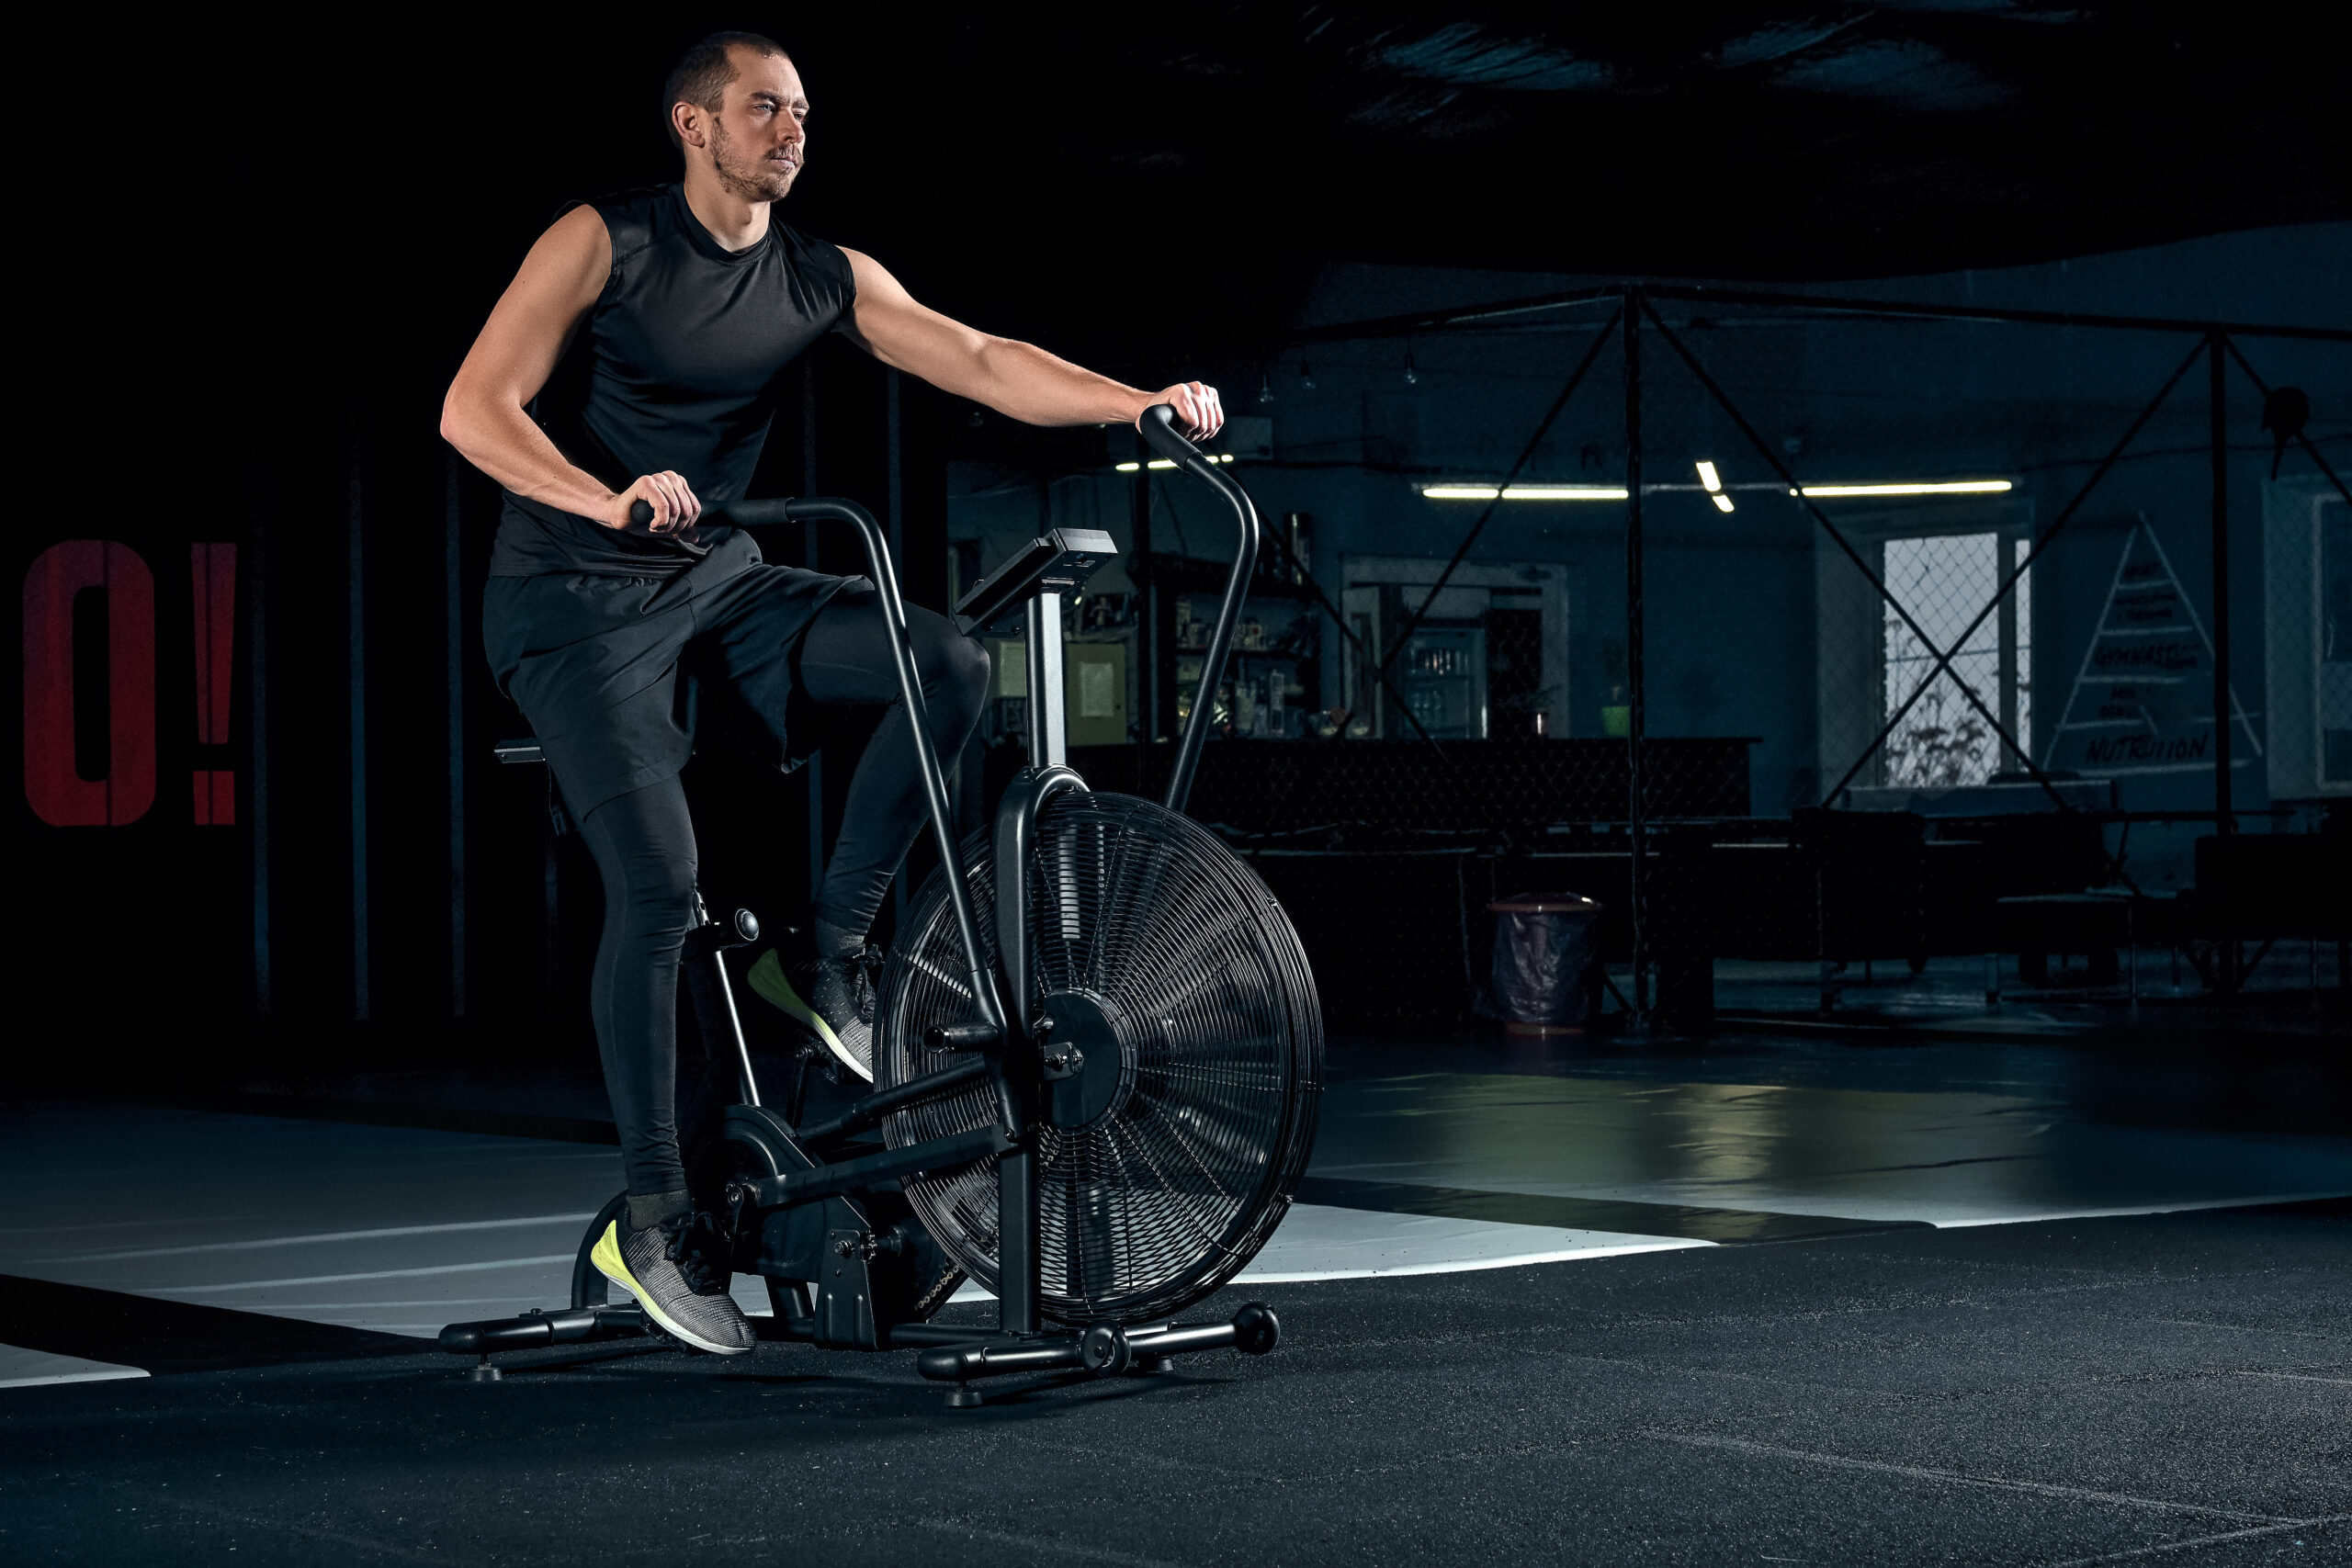 Male using air bike for cardio workout at cross training gym.